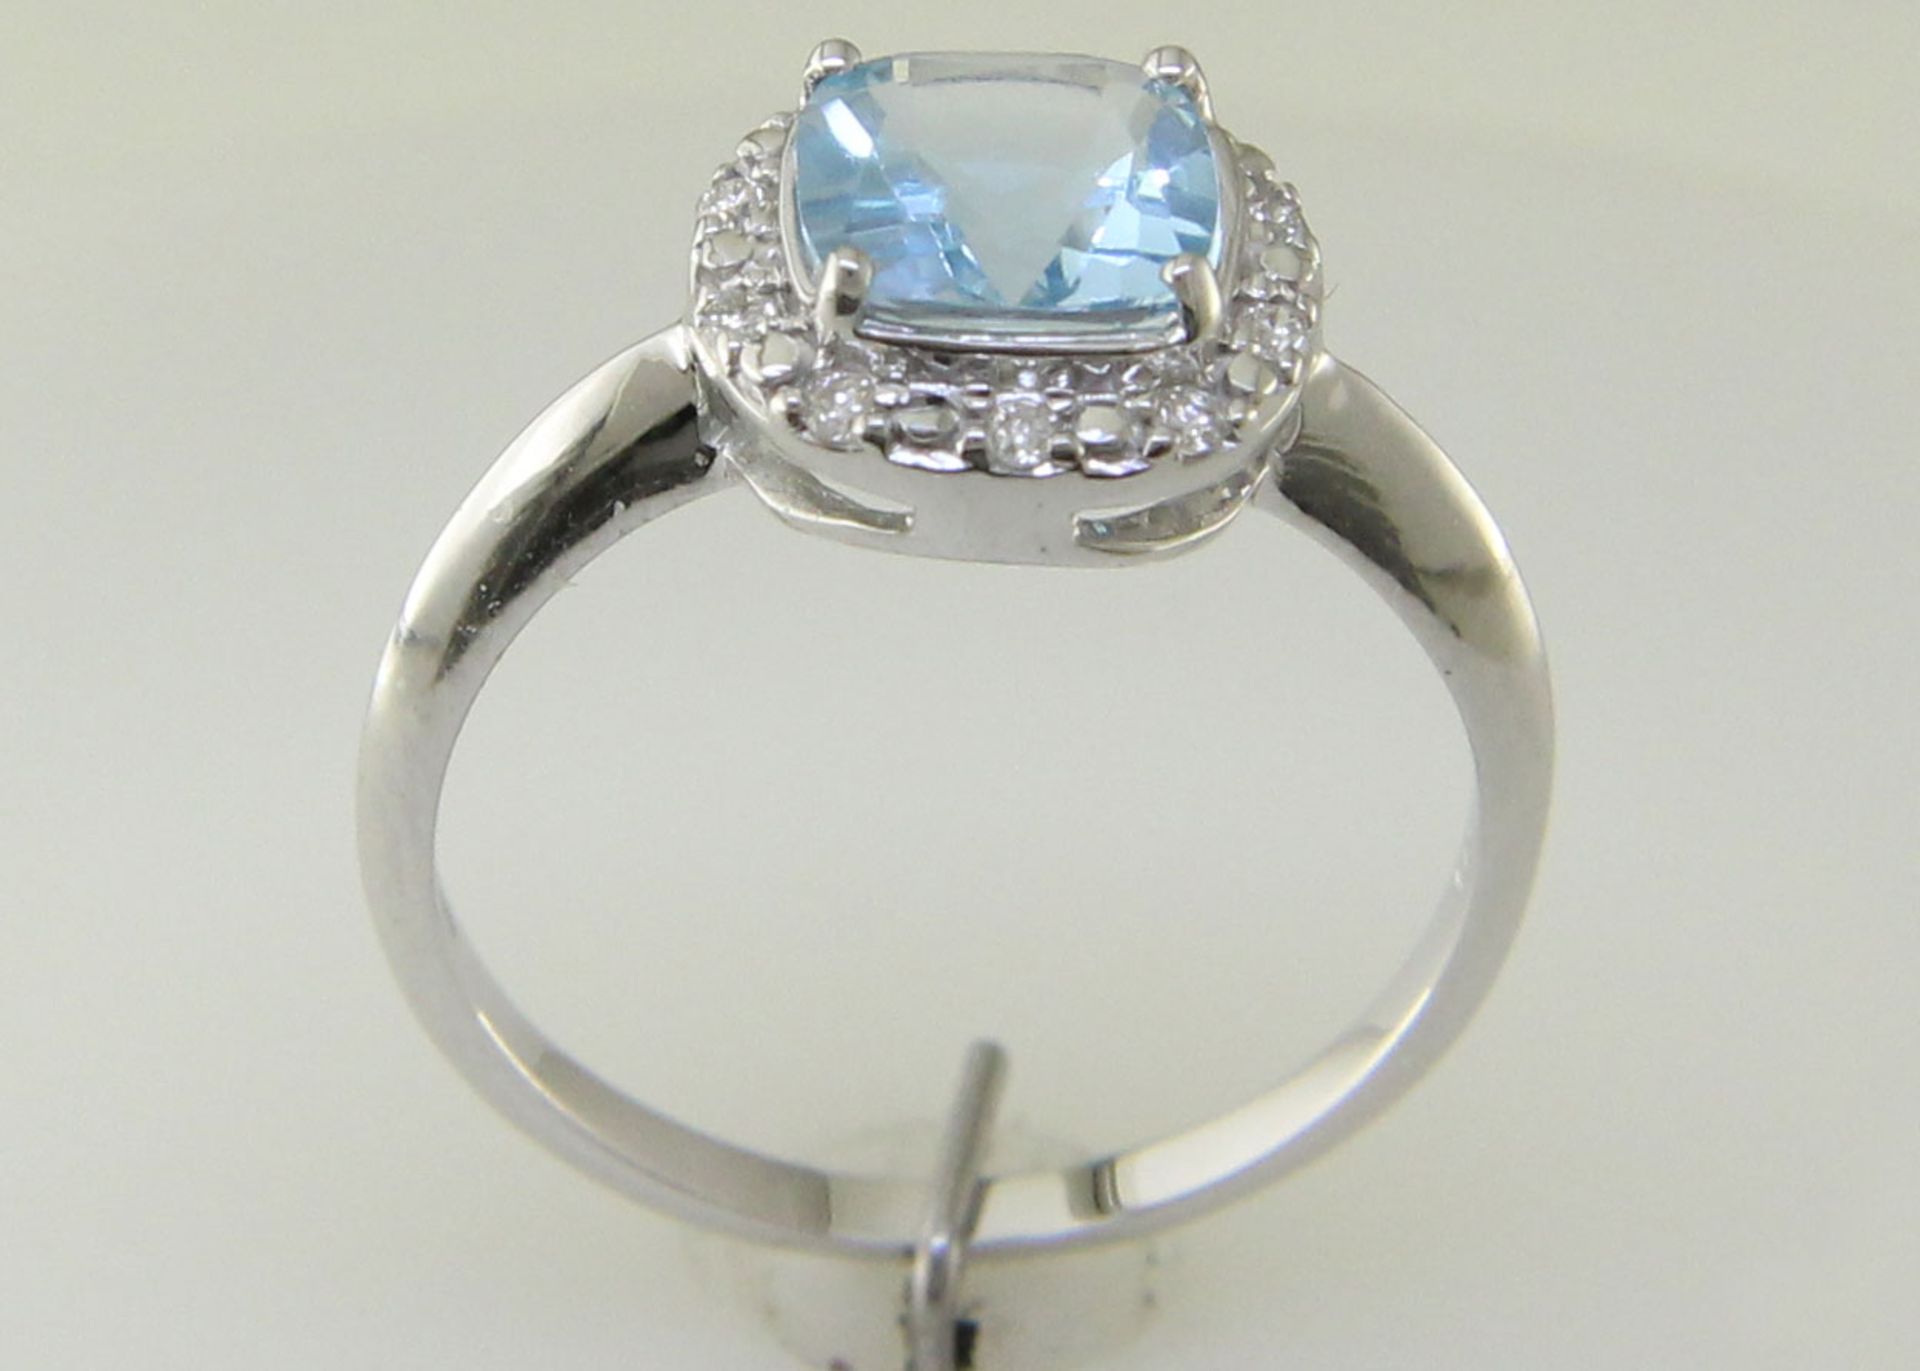 9ct White Gold Diamond And Blue Topaz Ring 0.10 Carats - Valued by GIE £1,920.00 - A stunning - Image 5 of 9